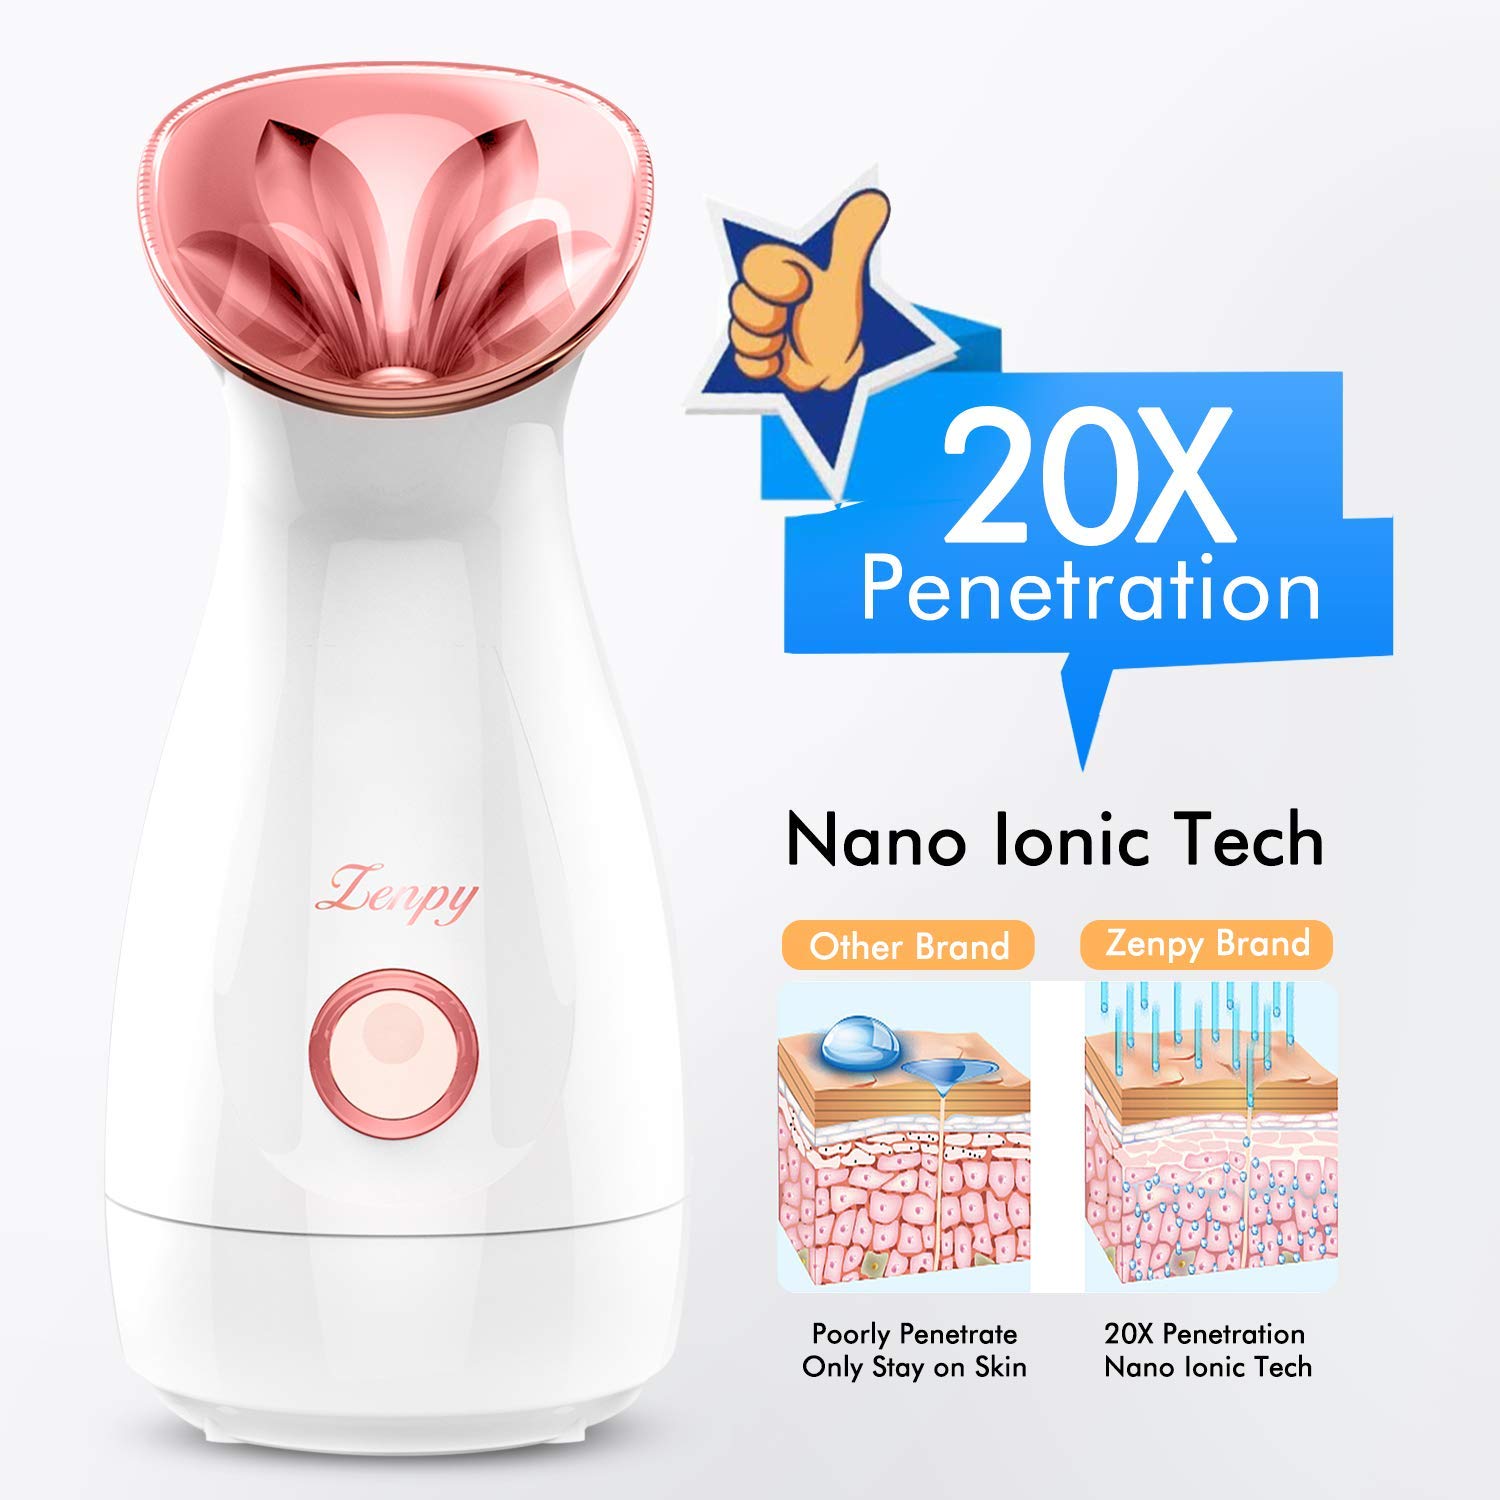 Review of Facial Steamer Nano Ionic Hot Mist Face Steamer